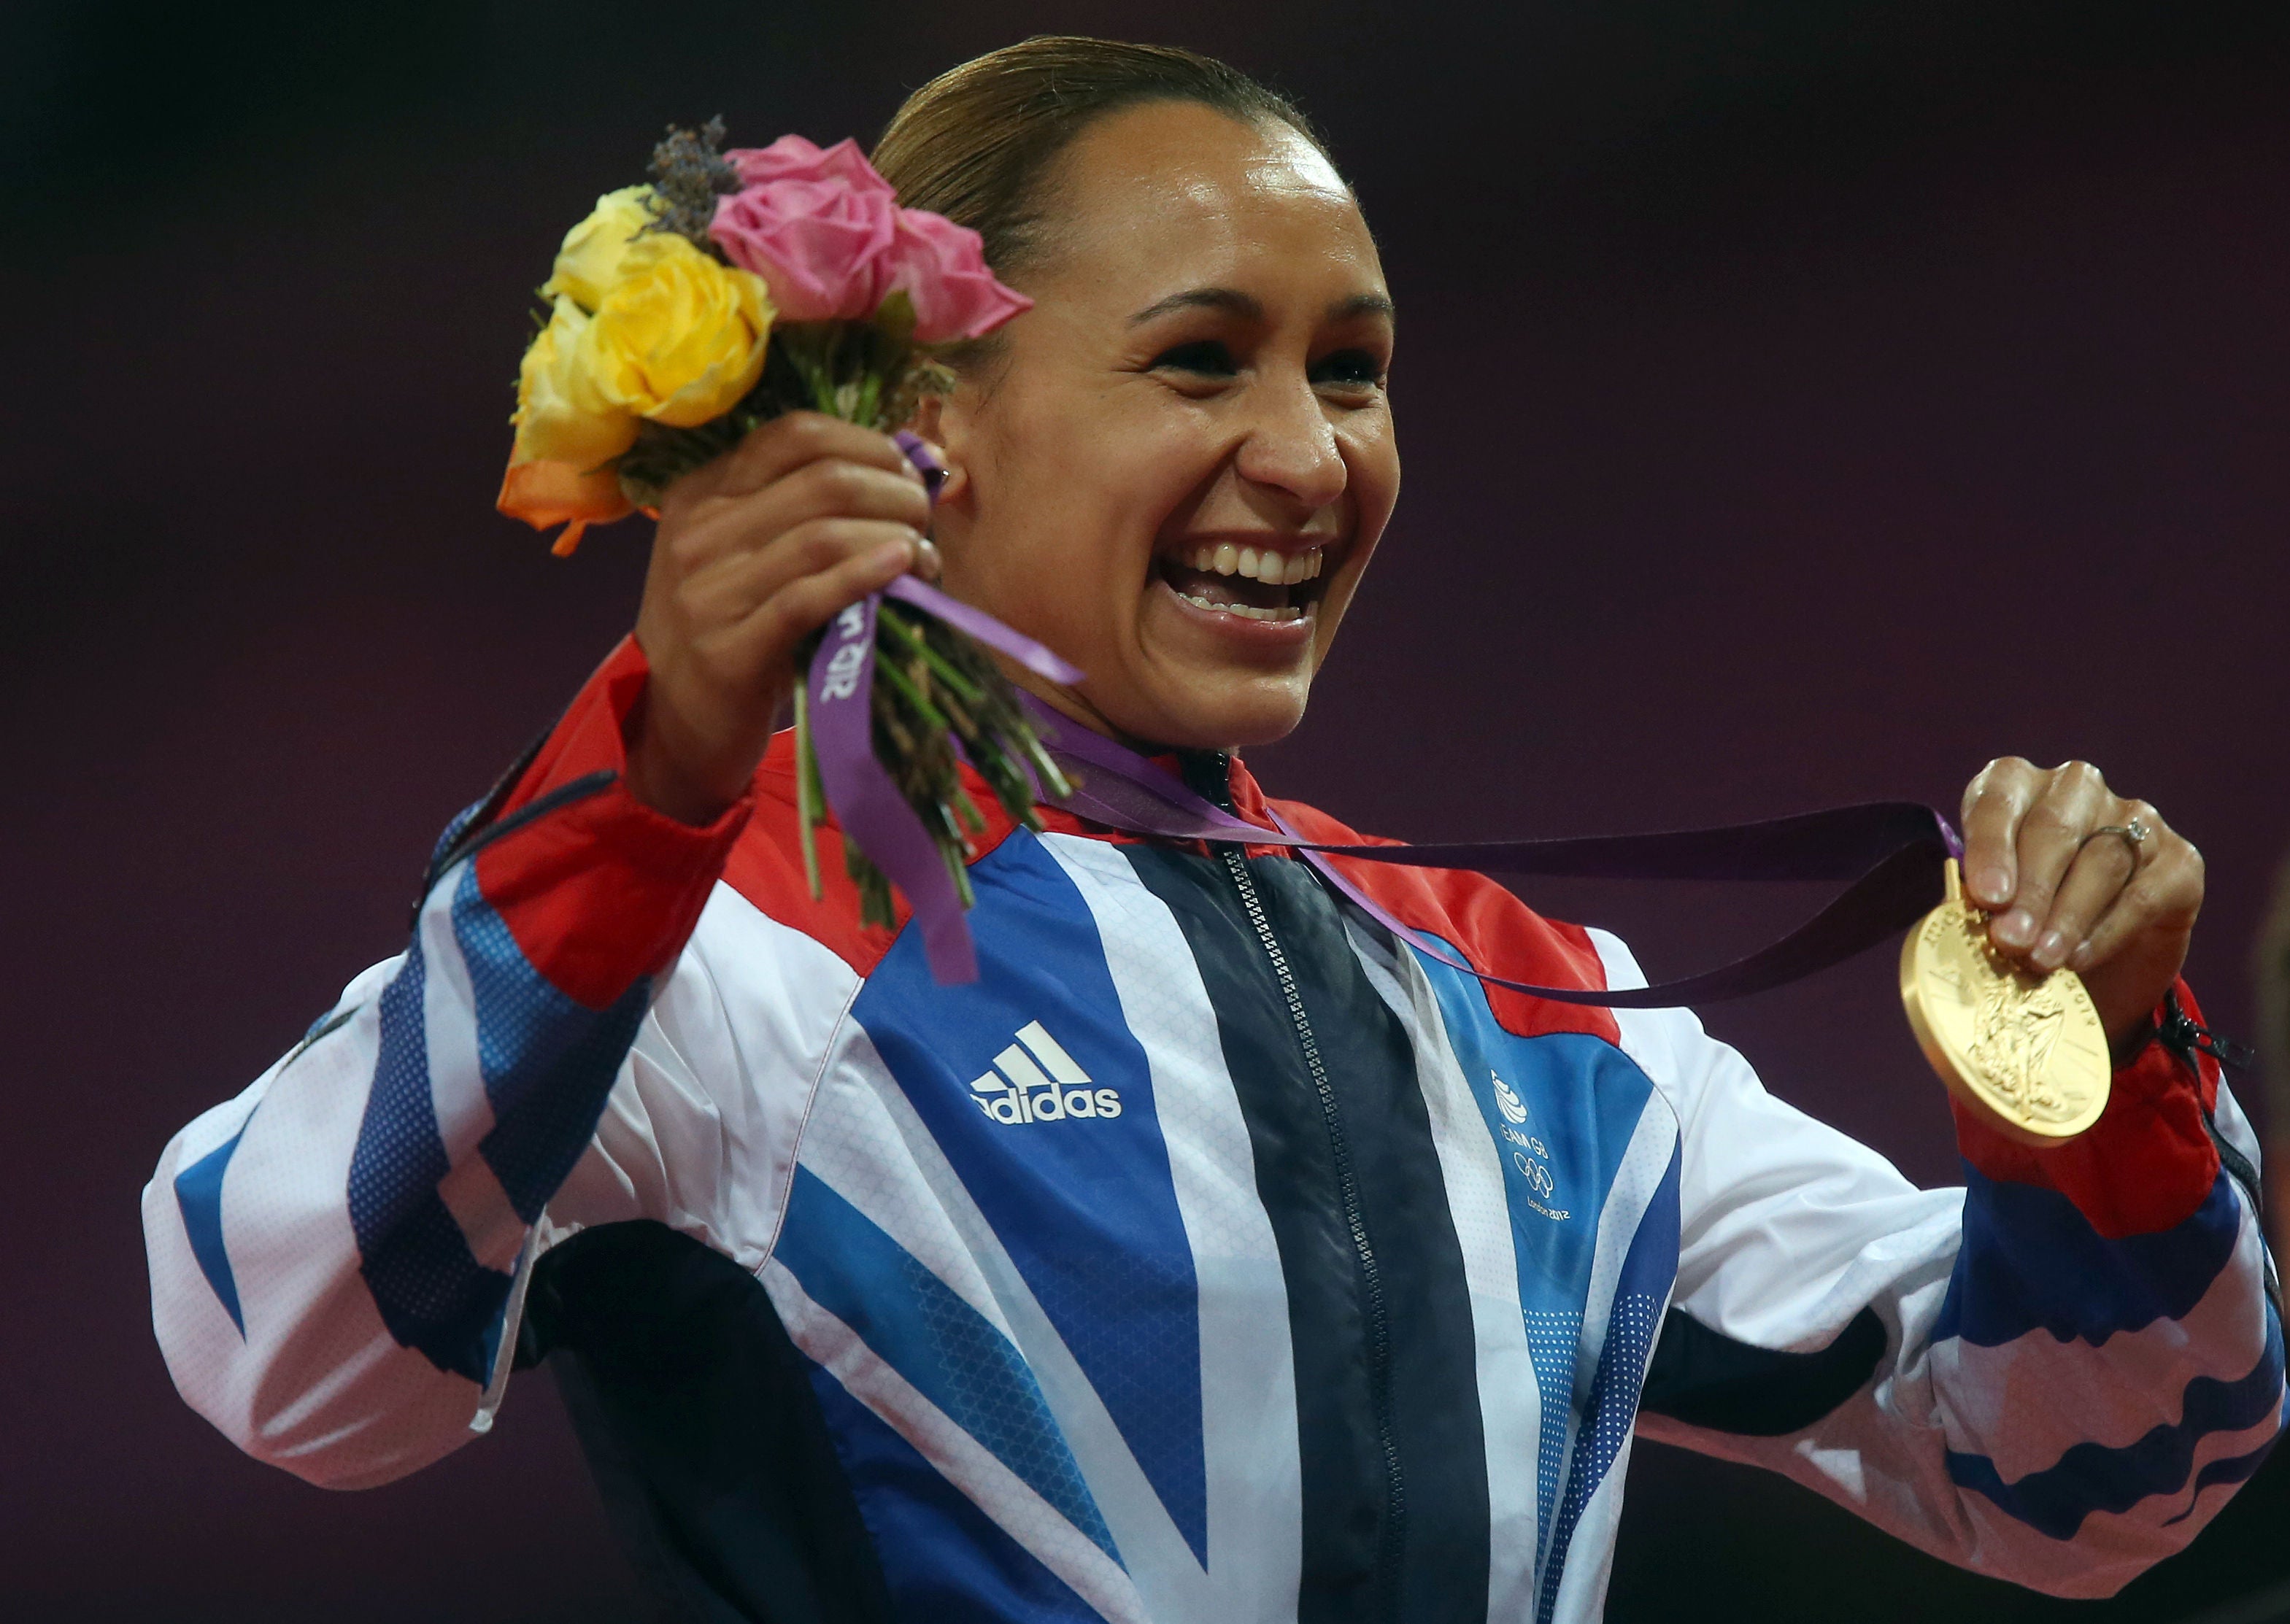 Jessica Ennis celebrated winning gold in the heptathlon at the Olympic Stadium (Dave Thompson/PA)